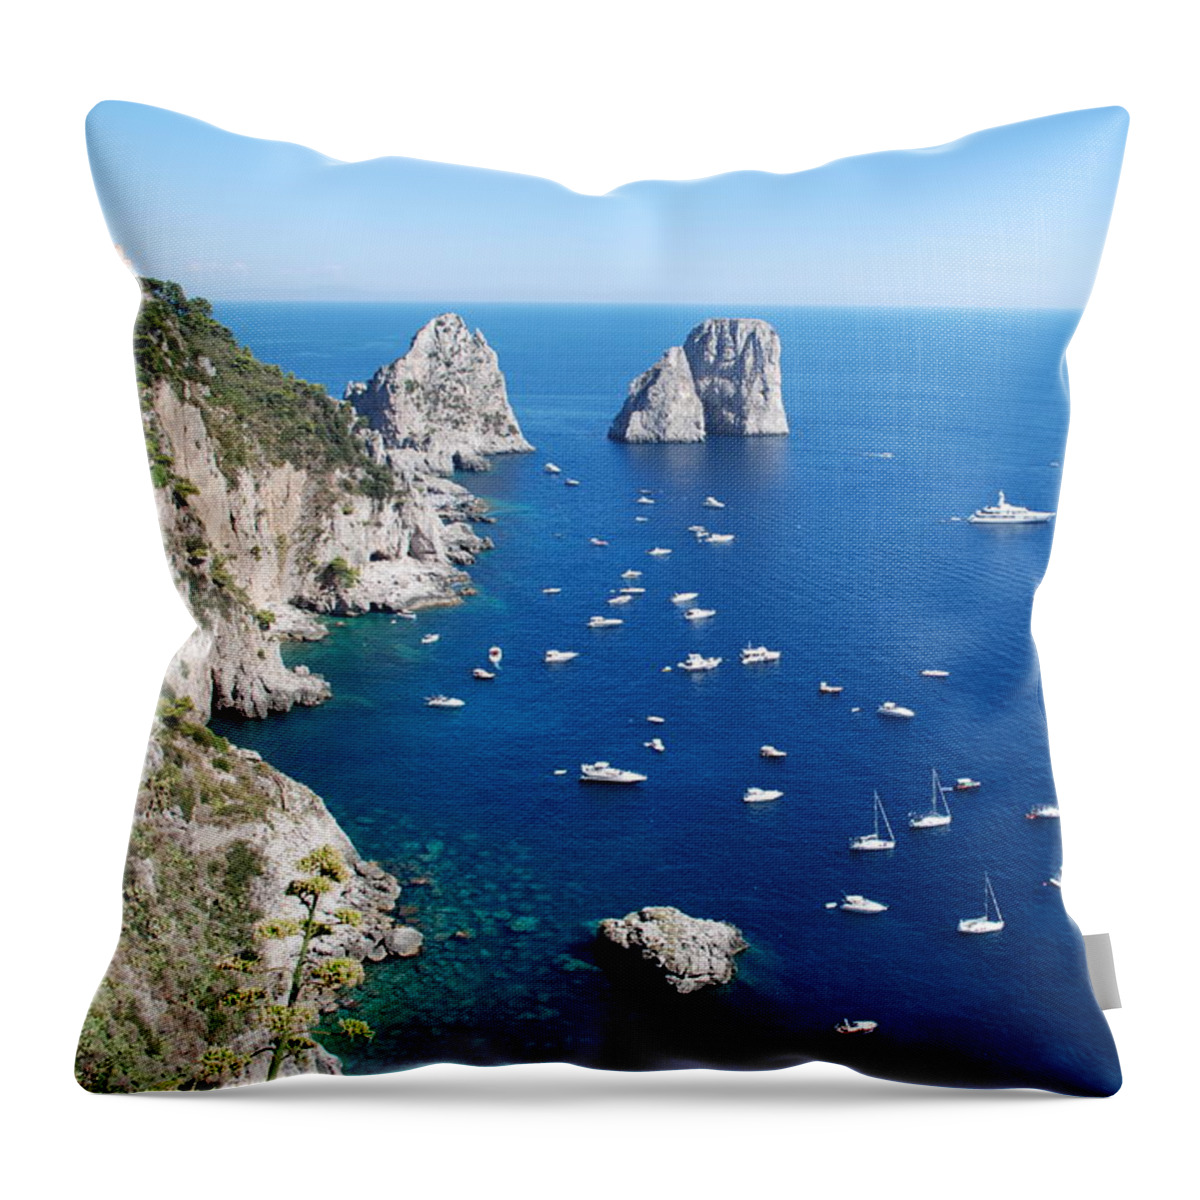 Capri Throw Pillow featuring the photograph Capri by Dany Lison